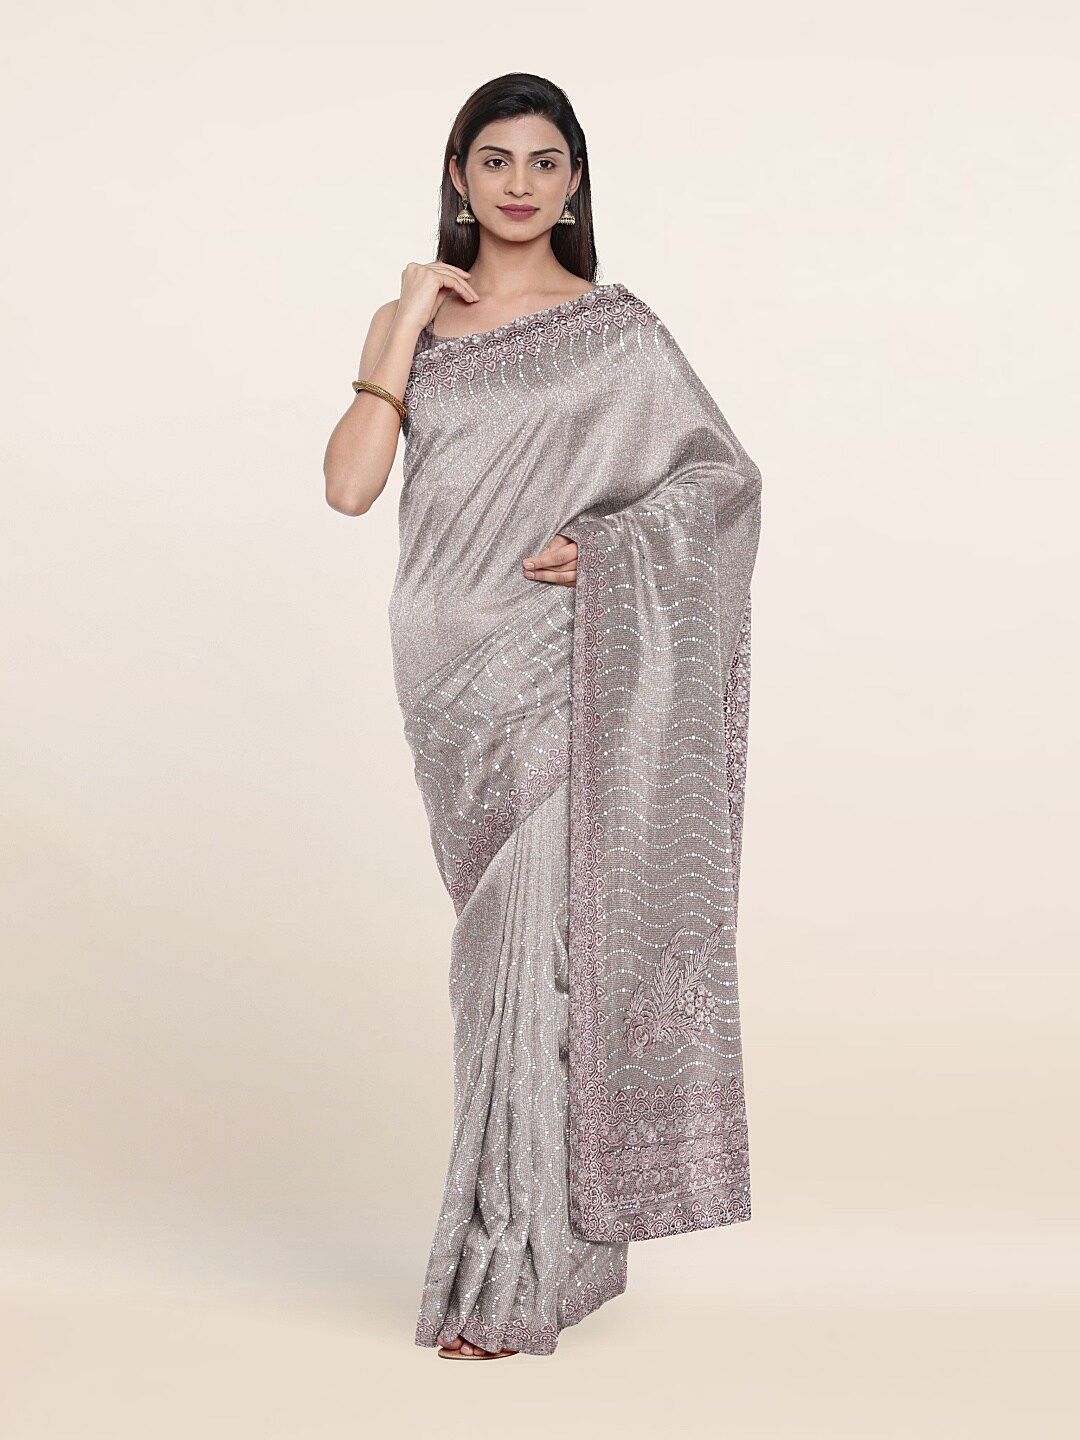 Pothys Pink & Grey Embellished Beads and Stones Georgette Saree Price in India